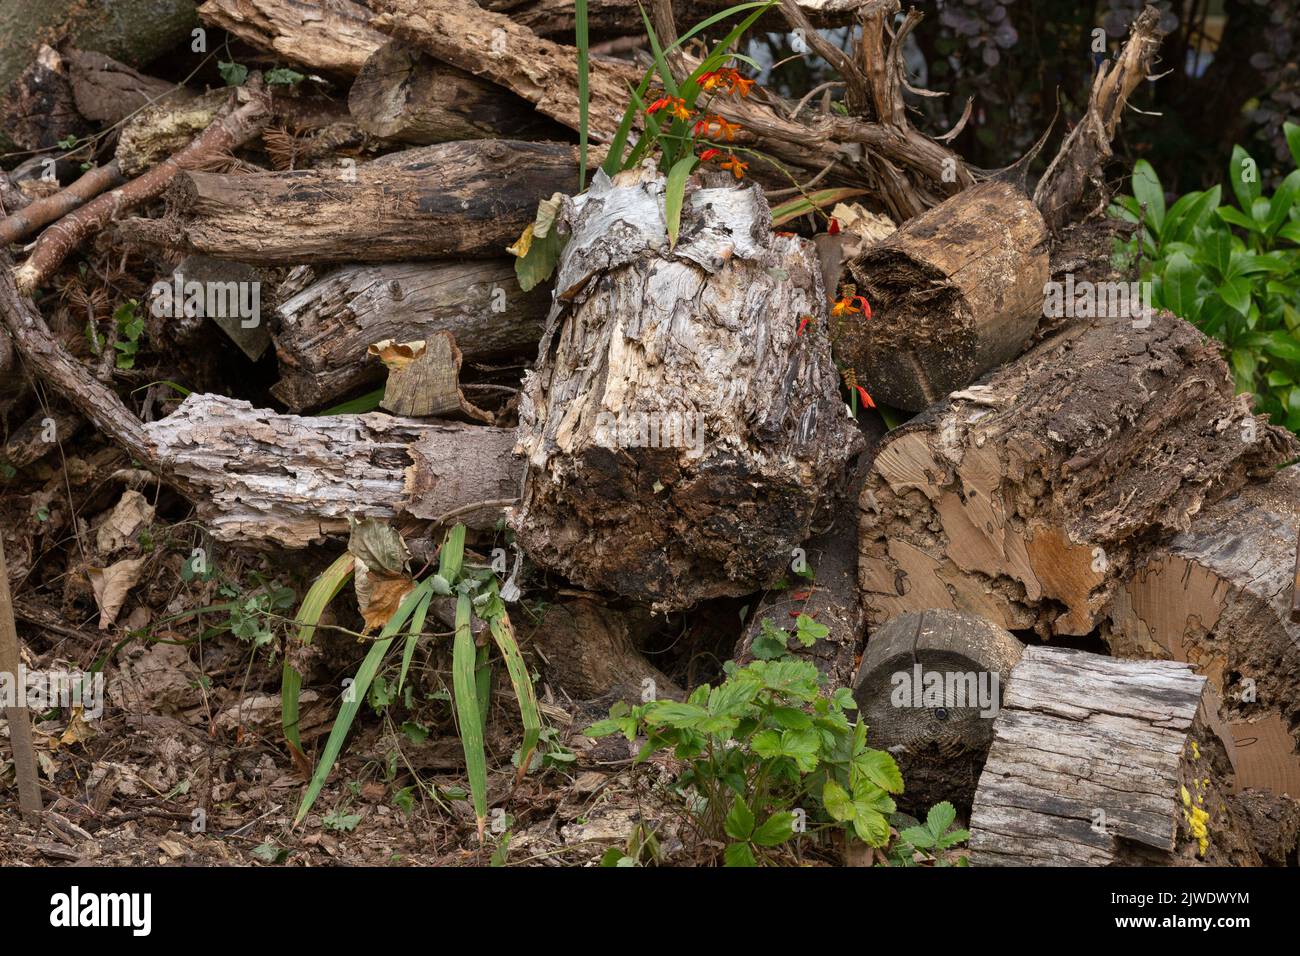 A dead wood log pile left in a garden for wildlife. Stock Photo